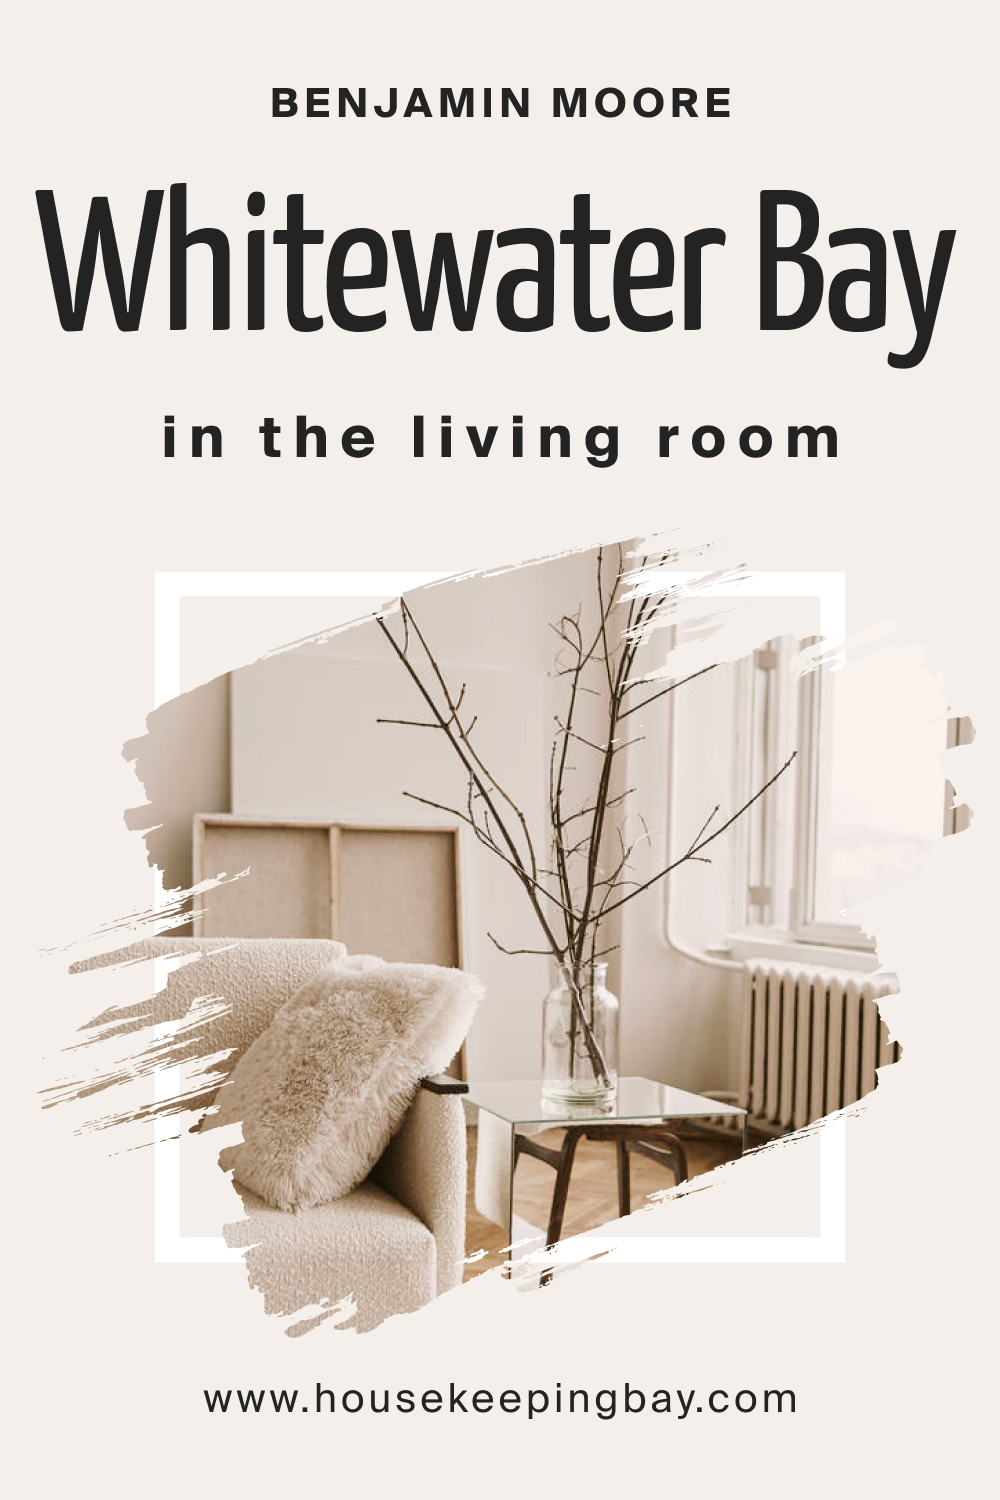 Benjamin Moore. Whitewater Bay OC 70 in the Living Room